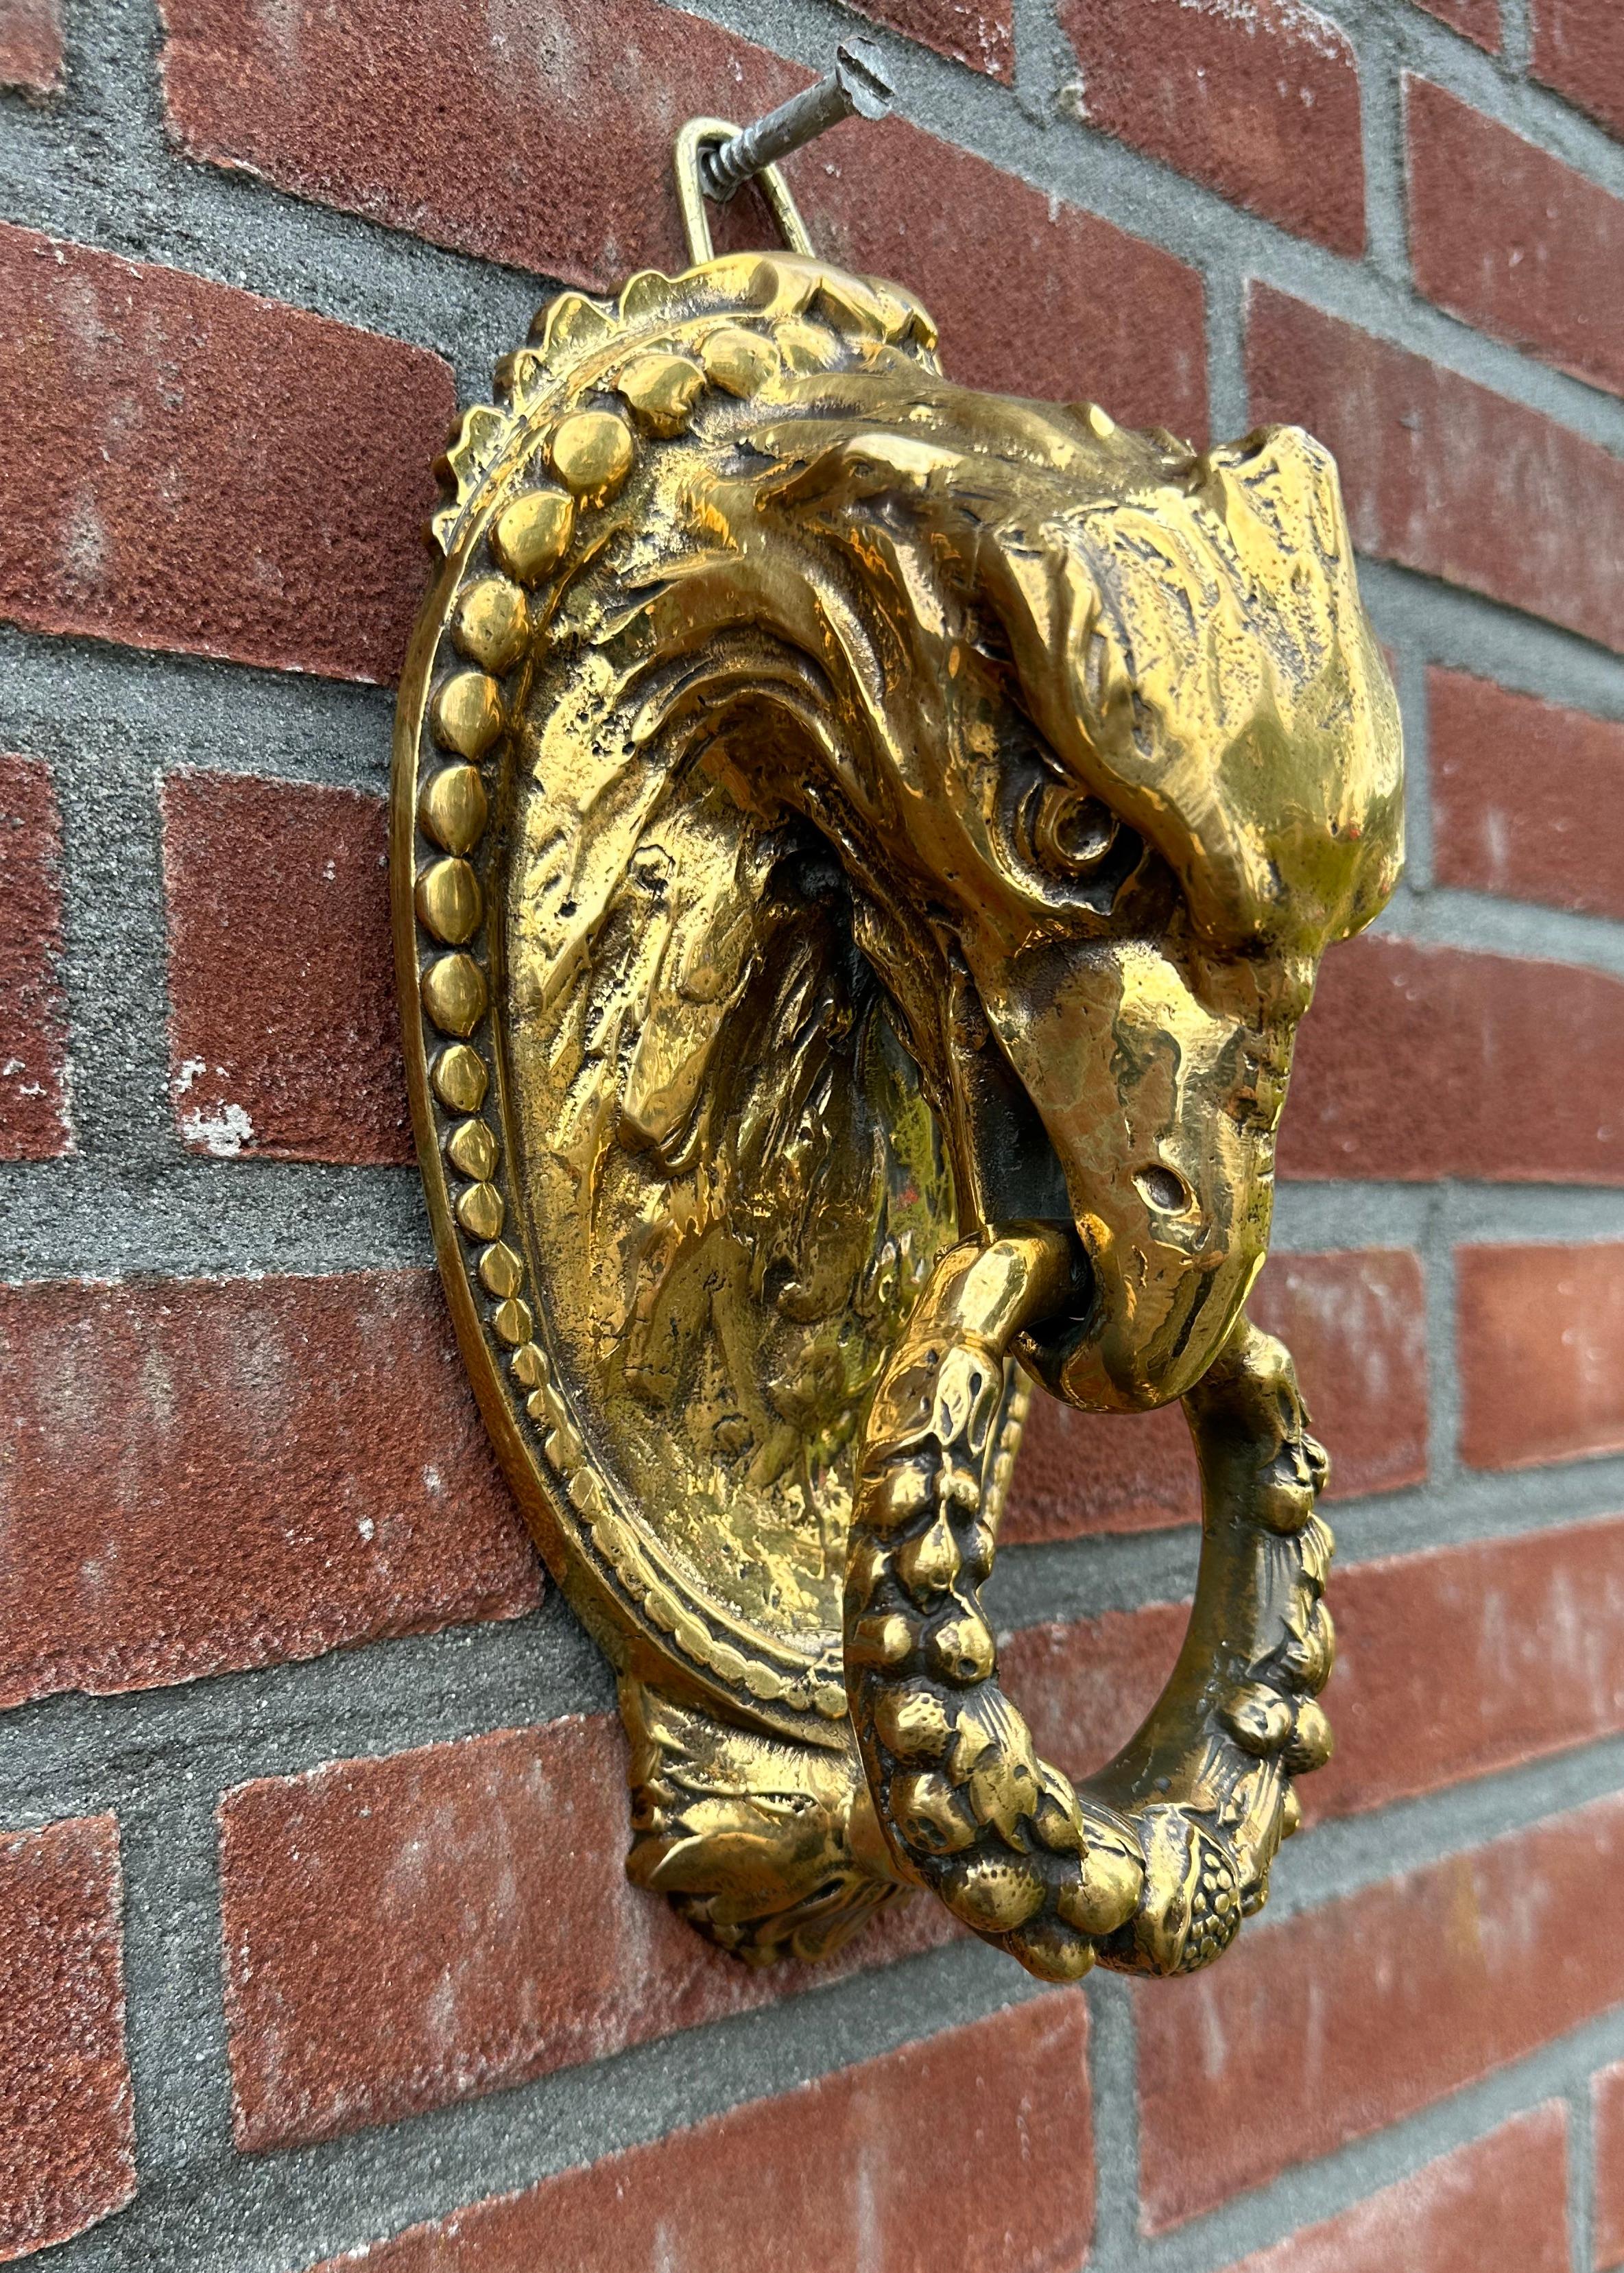 Certainly the most impressive antique door knocker on 1stdibs.

This marvelously handcrafted and amazing condition antique door knocker is another one of our recent great finds. Can you imagine this fine bronze eagle on your door? Having this